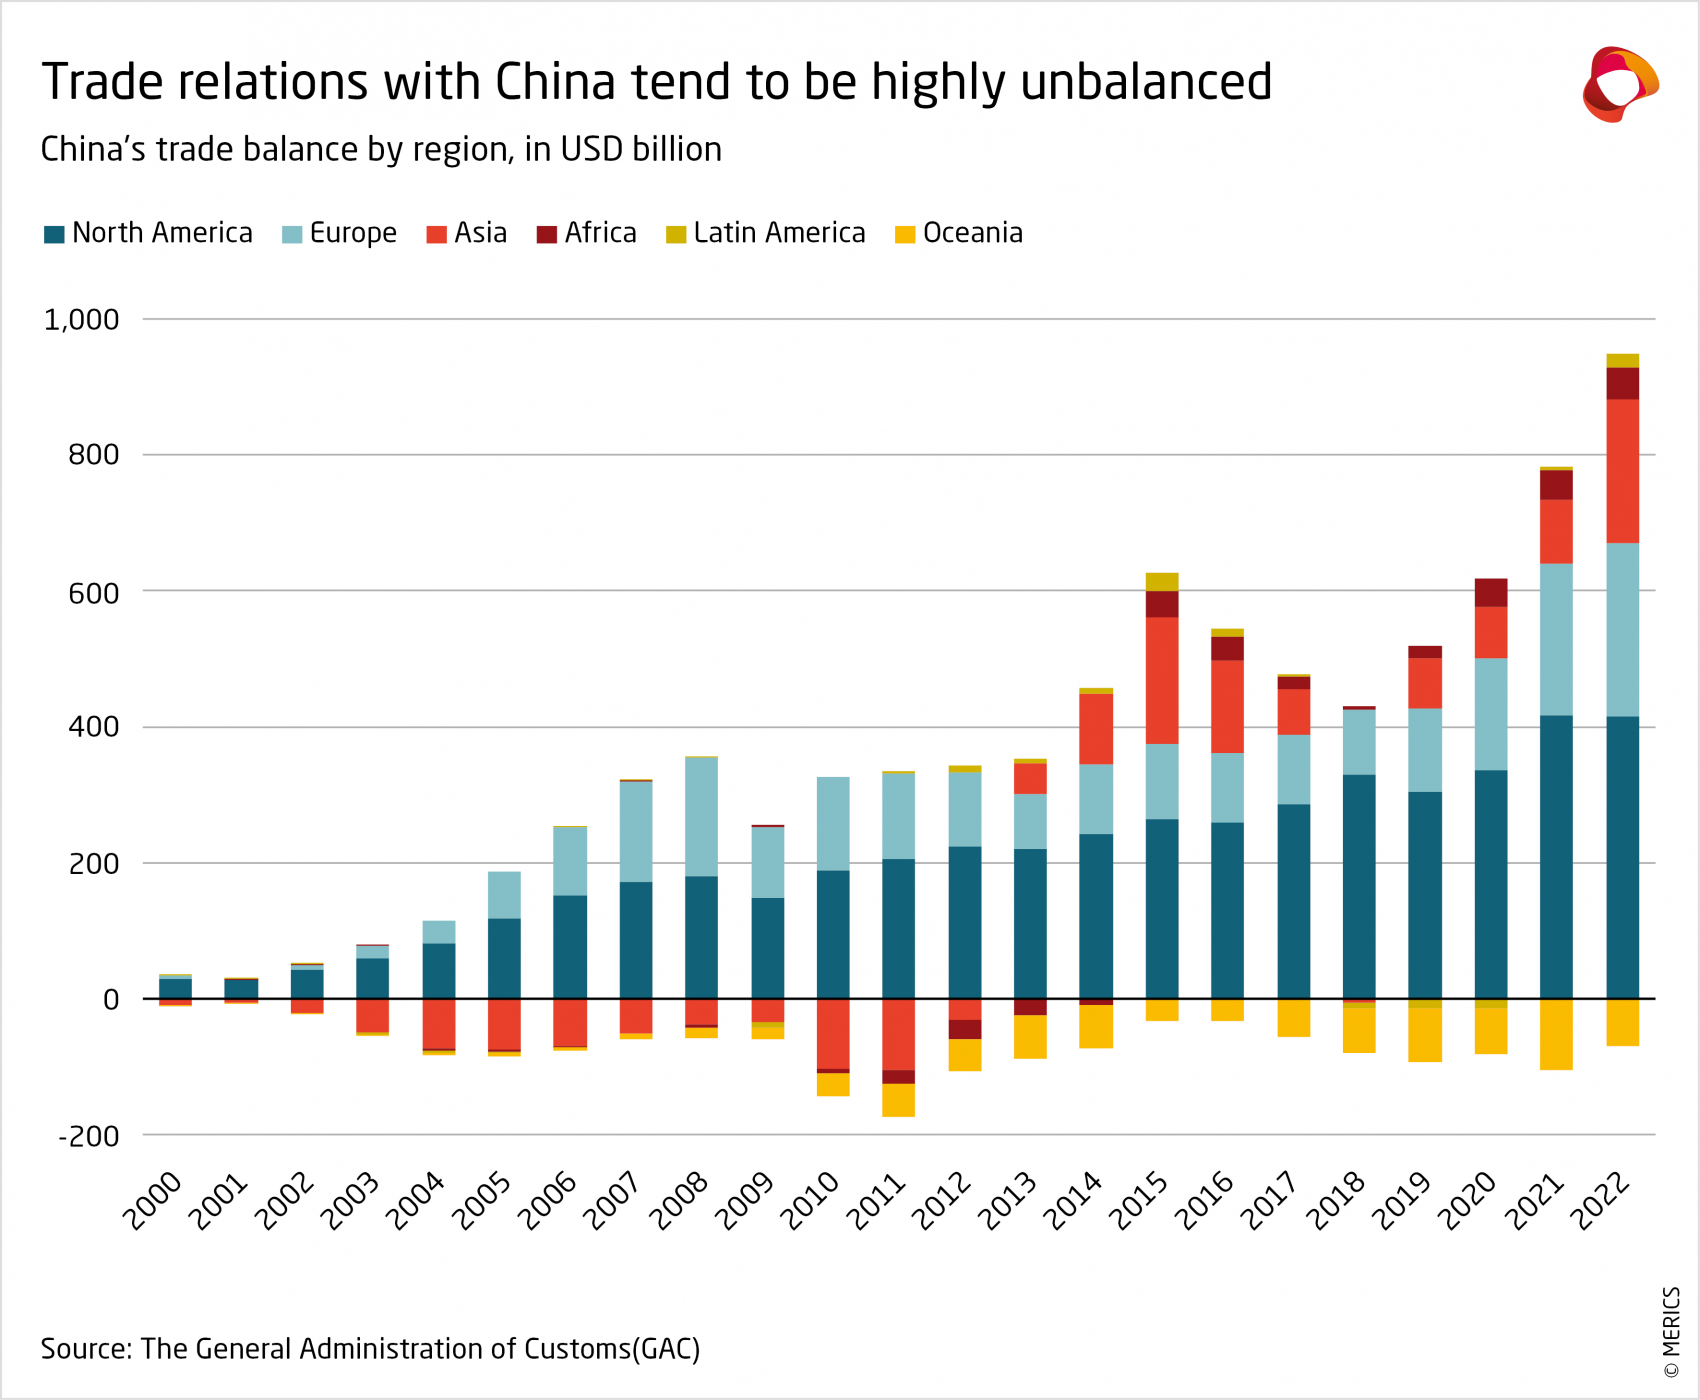 merics-report-the-party-knows-best-trade-relations-with-china-tend-to-be-highly-unbalanced-exhibit-17.png